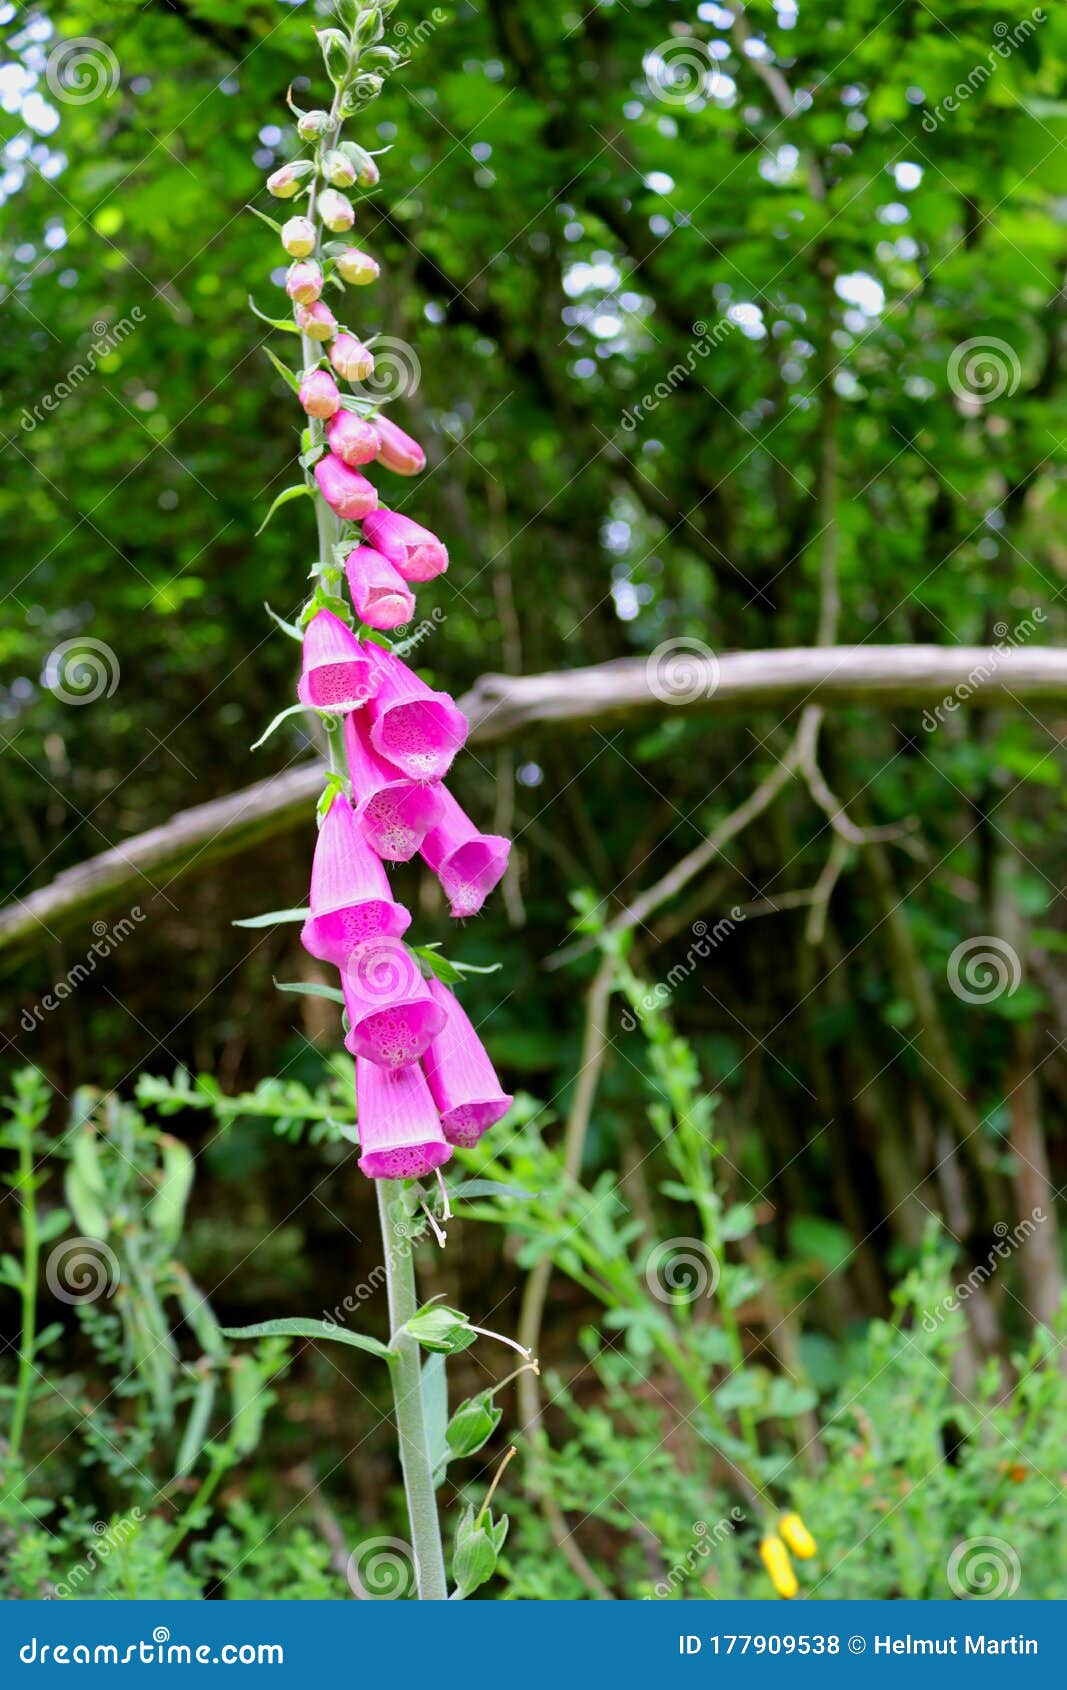 bright pink-red foxglove flowers close-up